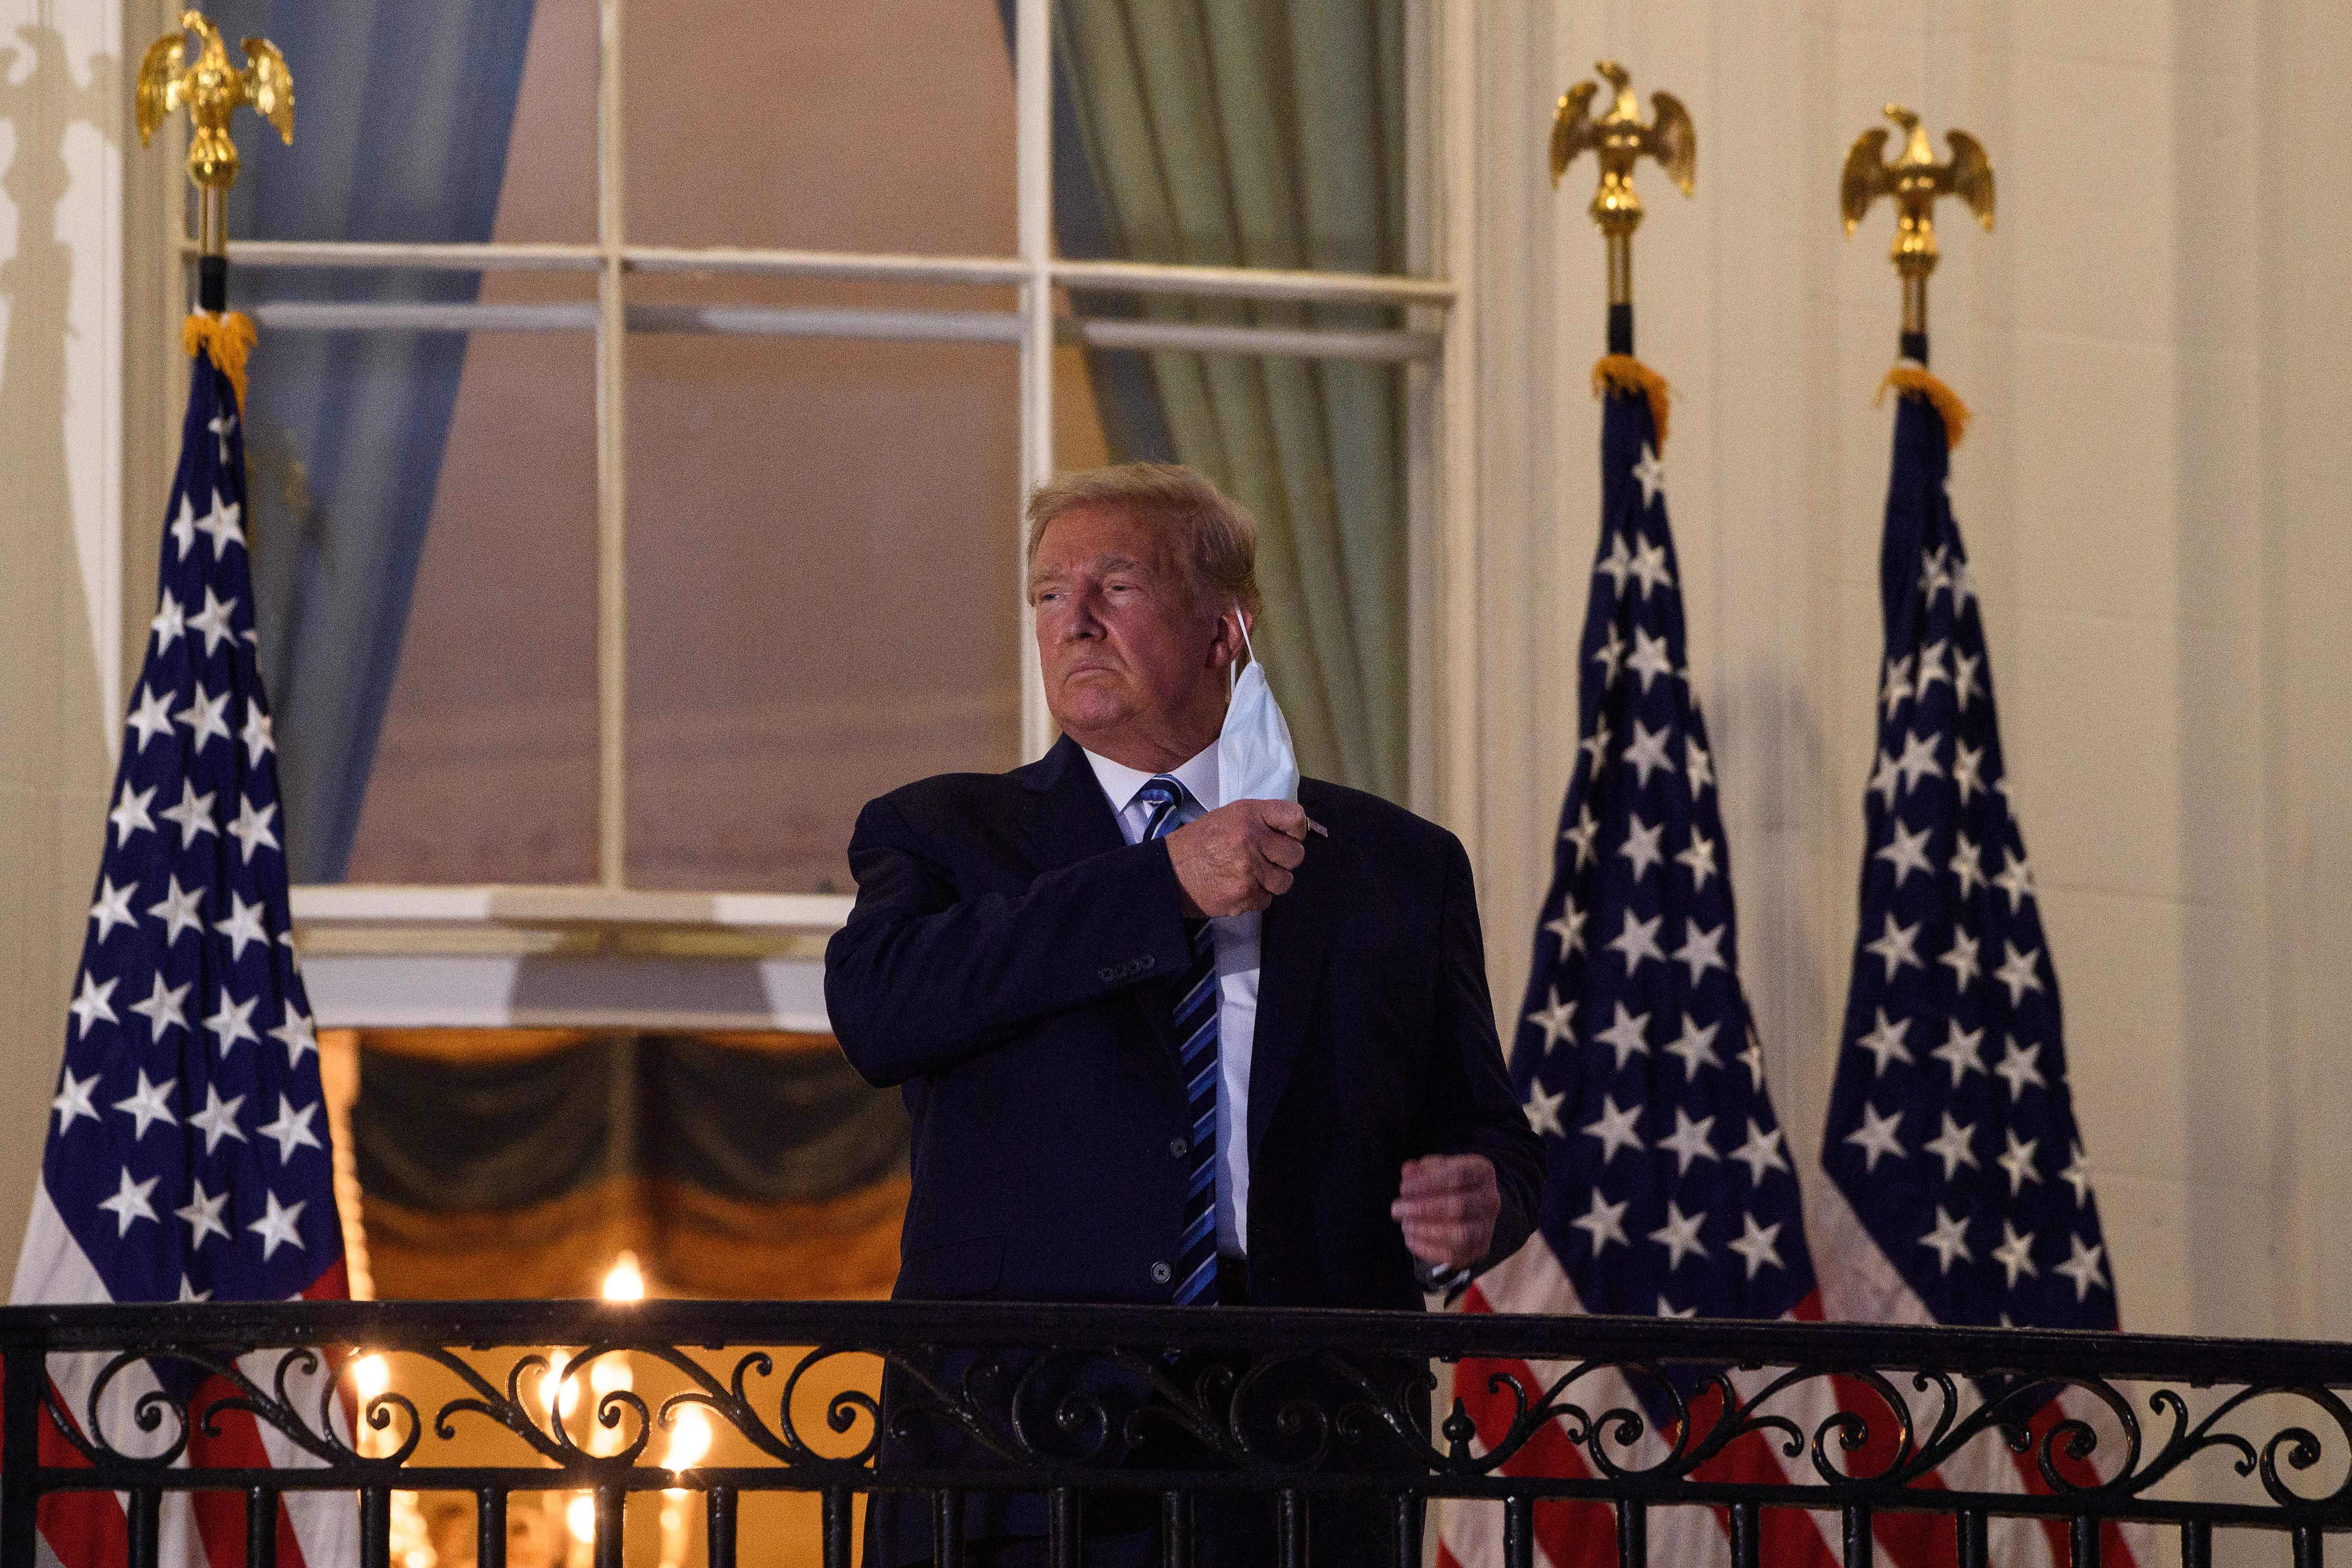 President Donald Trump takes off his face mask as he arrives at the White House upon his return from Walter Reed Medical Center, where he underwent treatment for Covid-19, in Washington, D.C, on Oct. 5, 2020.